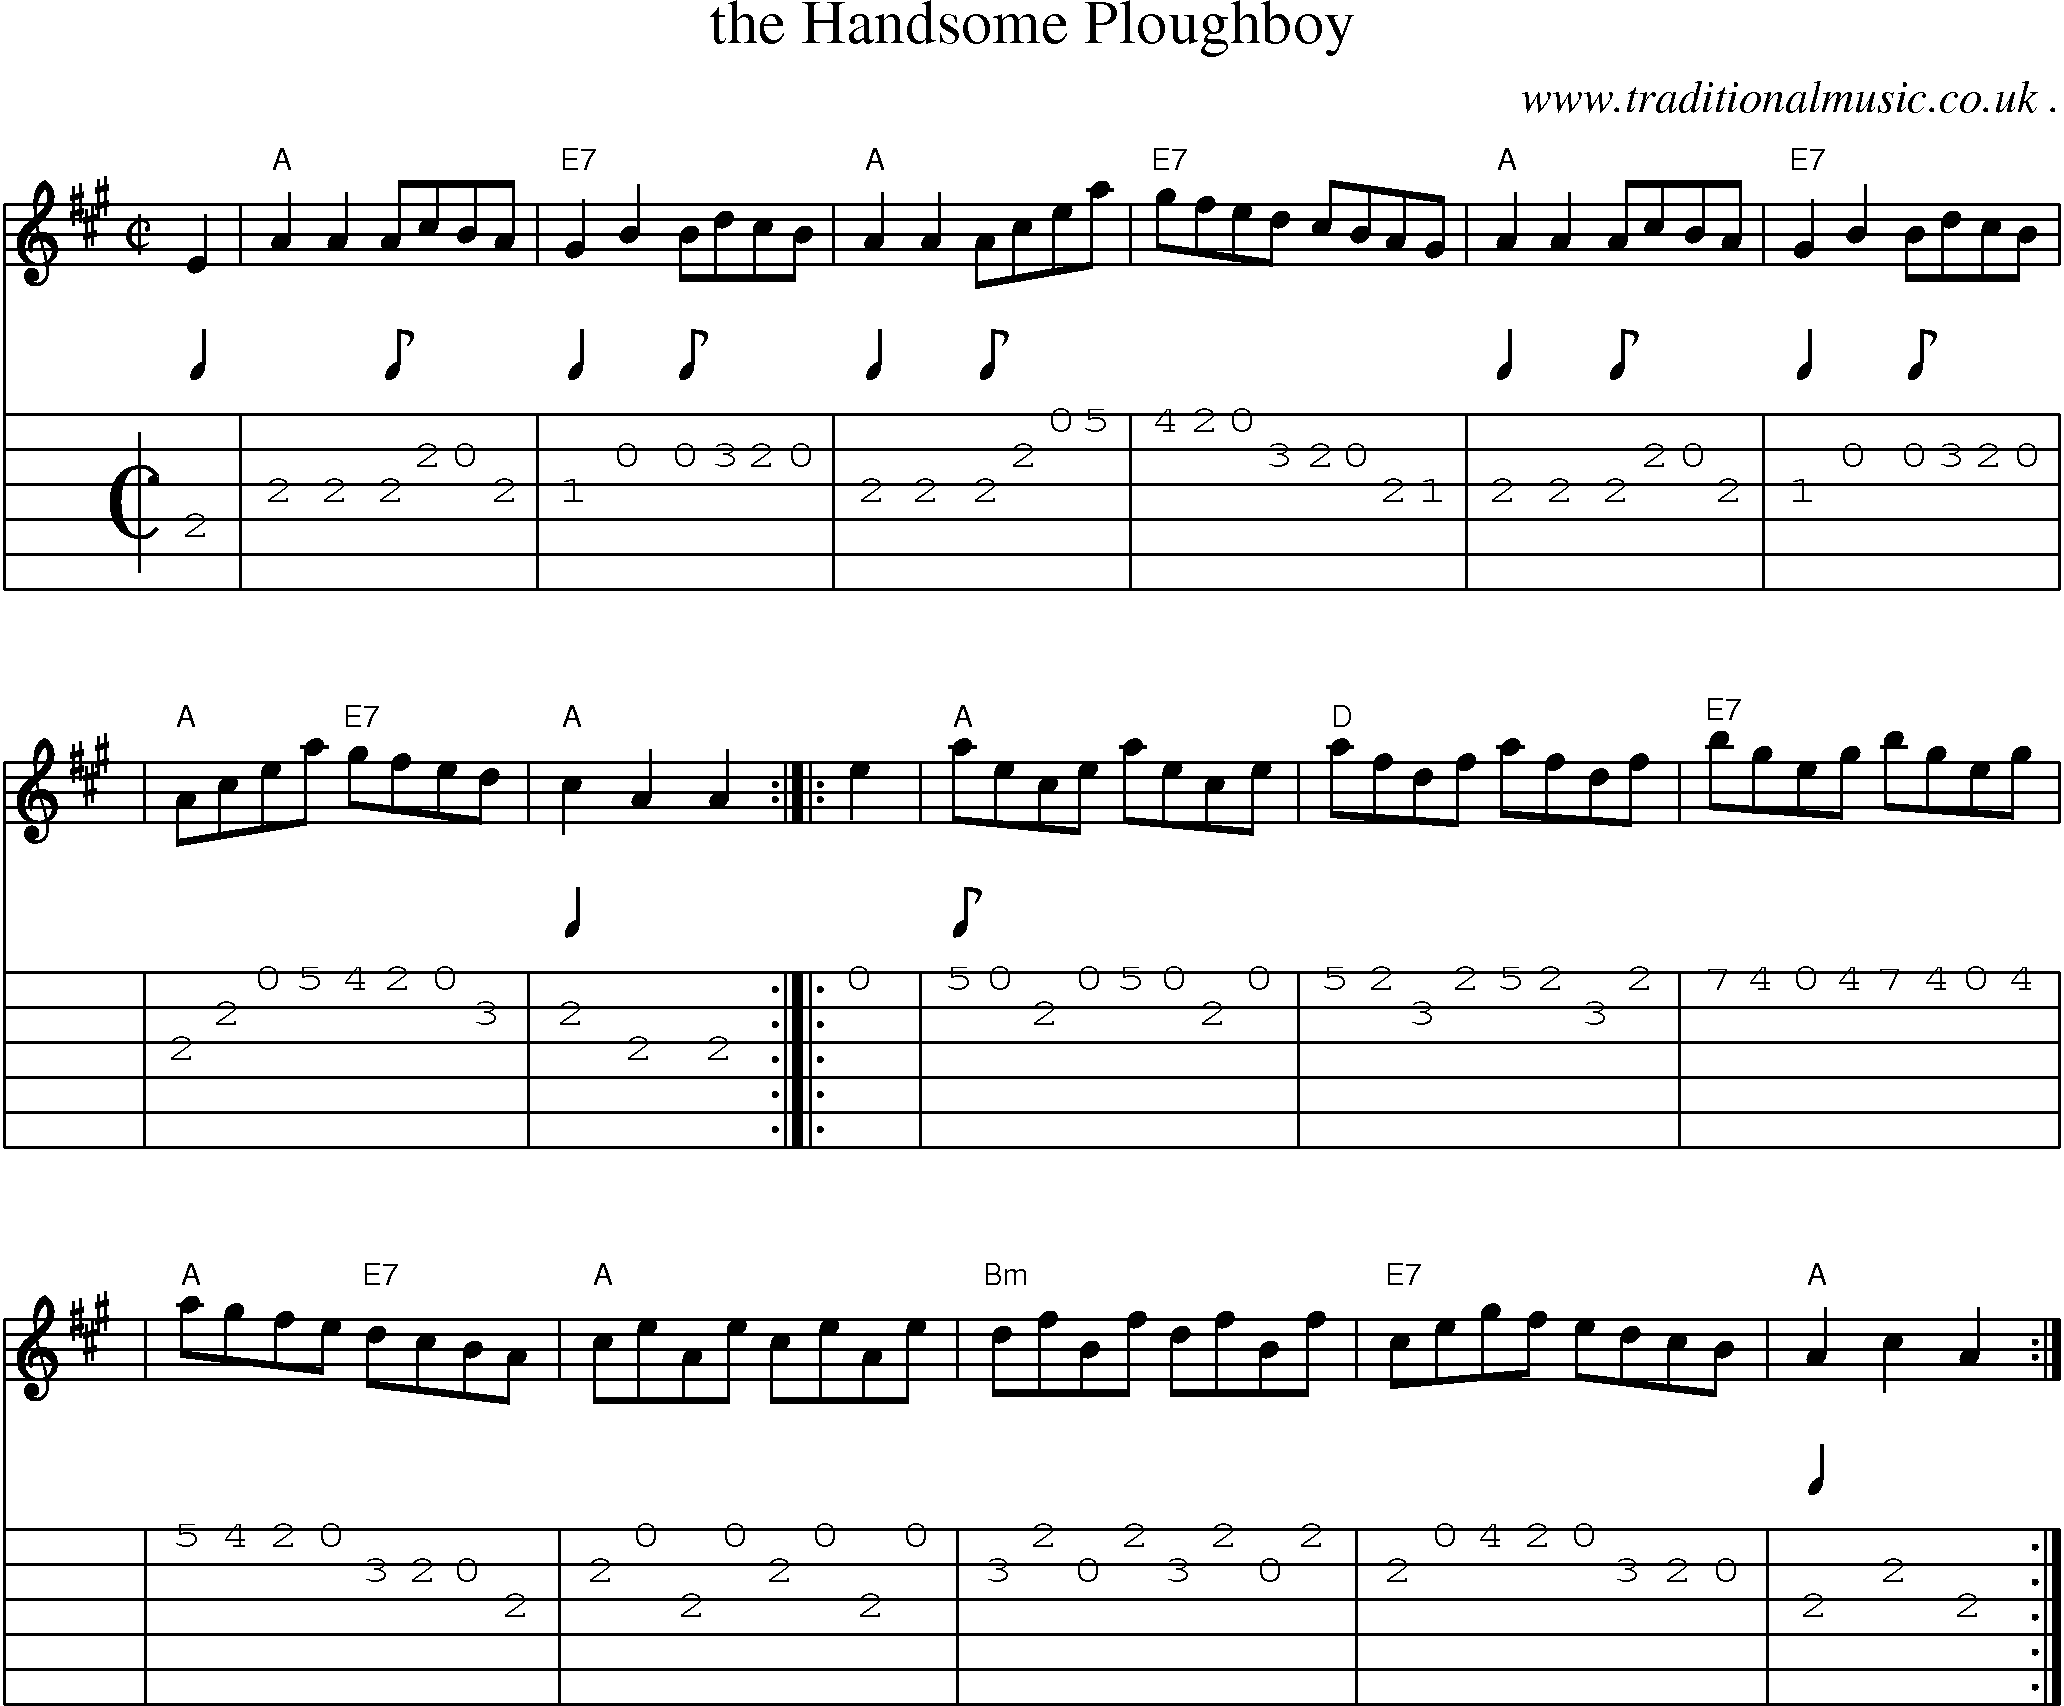 Sheet-music  score, Chords and Guitar Tabs for The Handsome Ploughboy